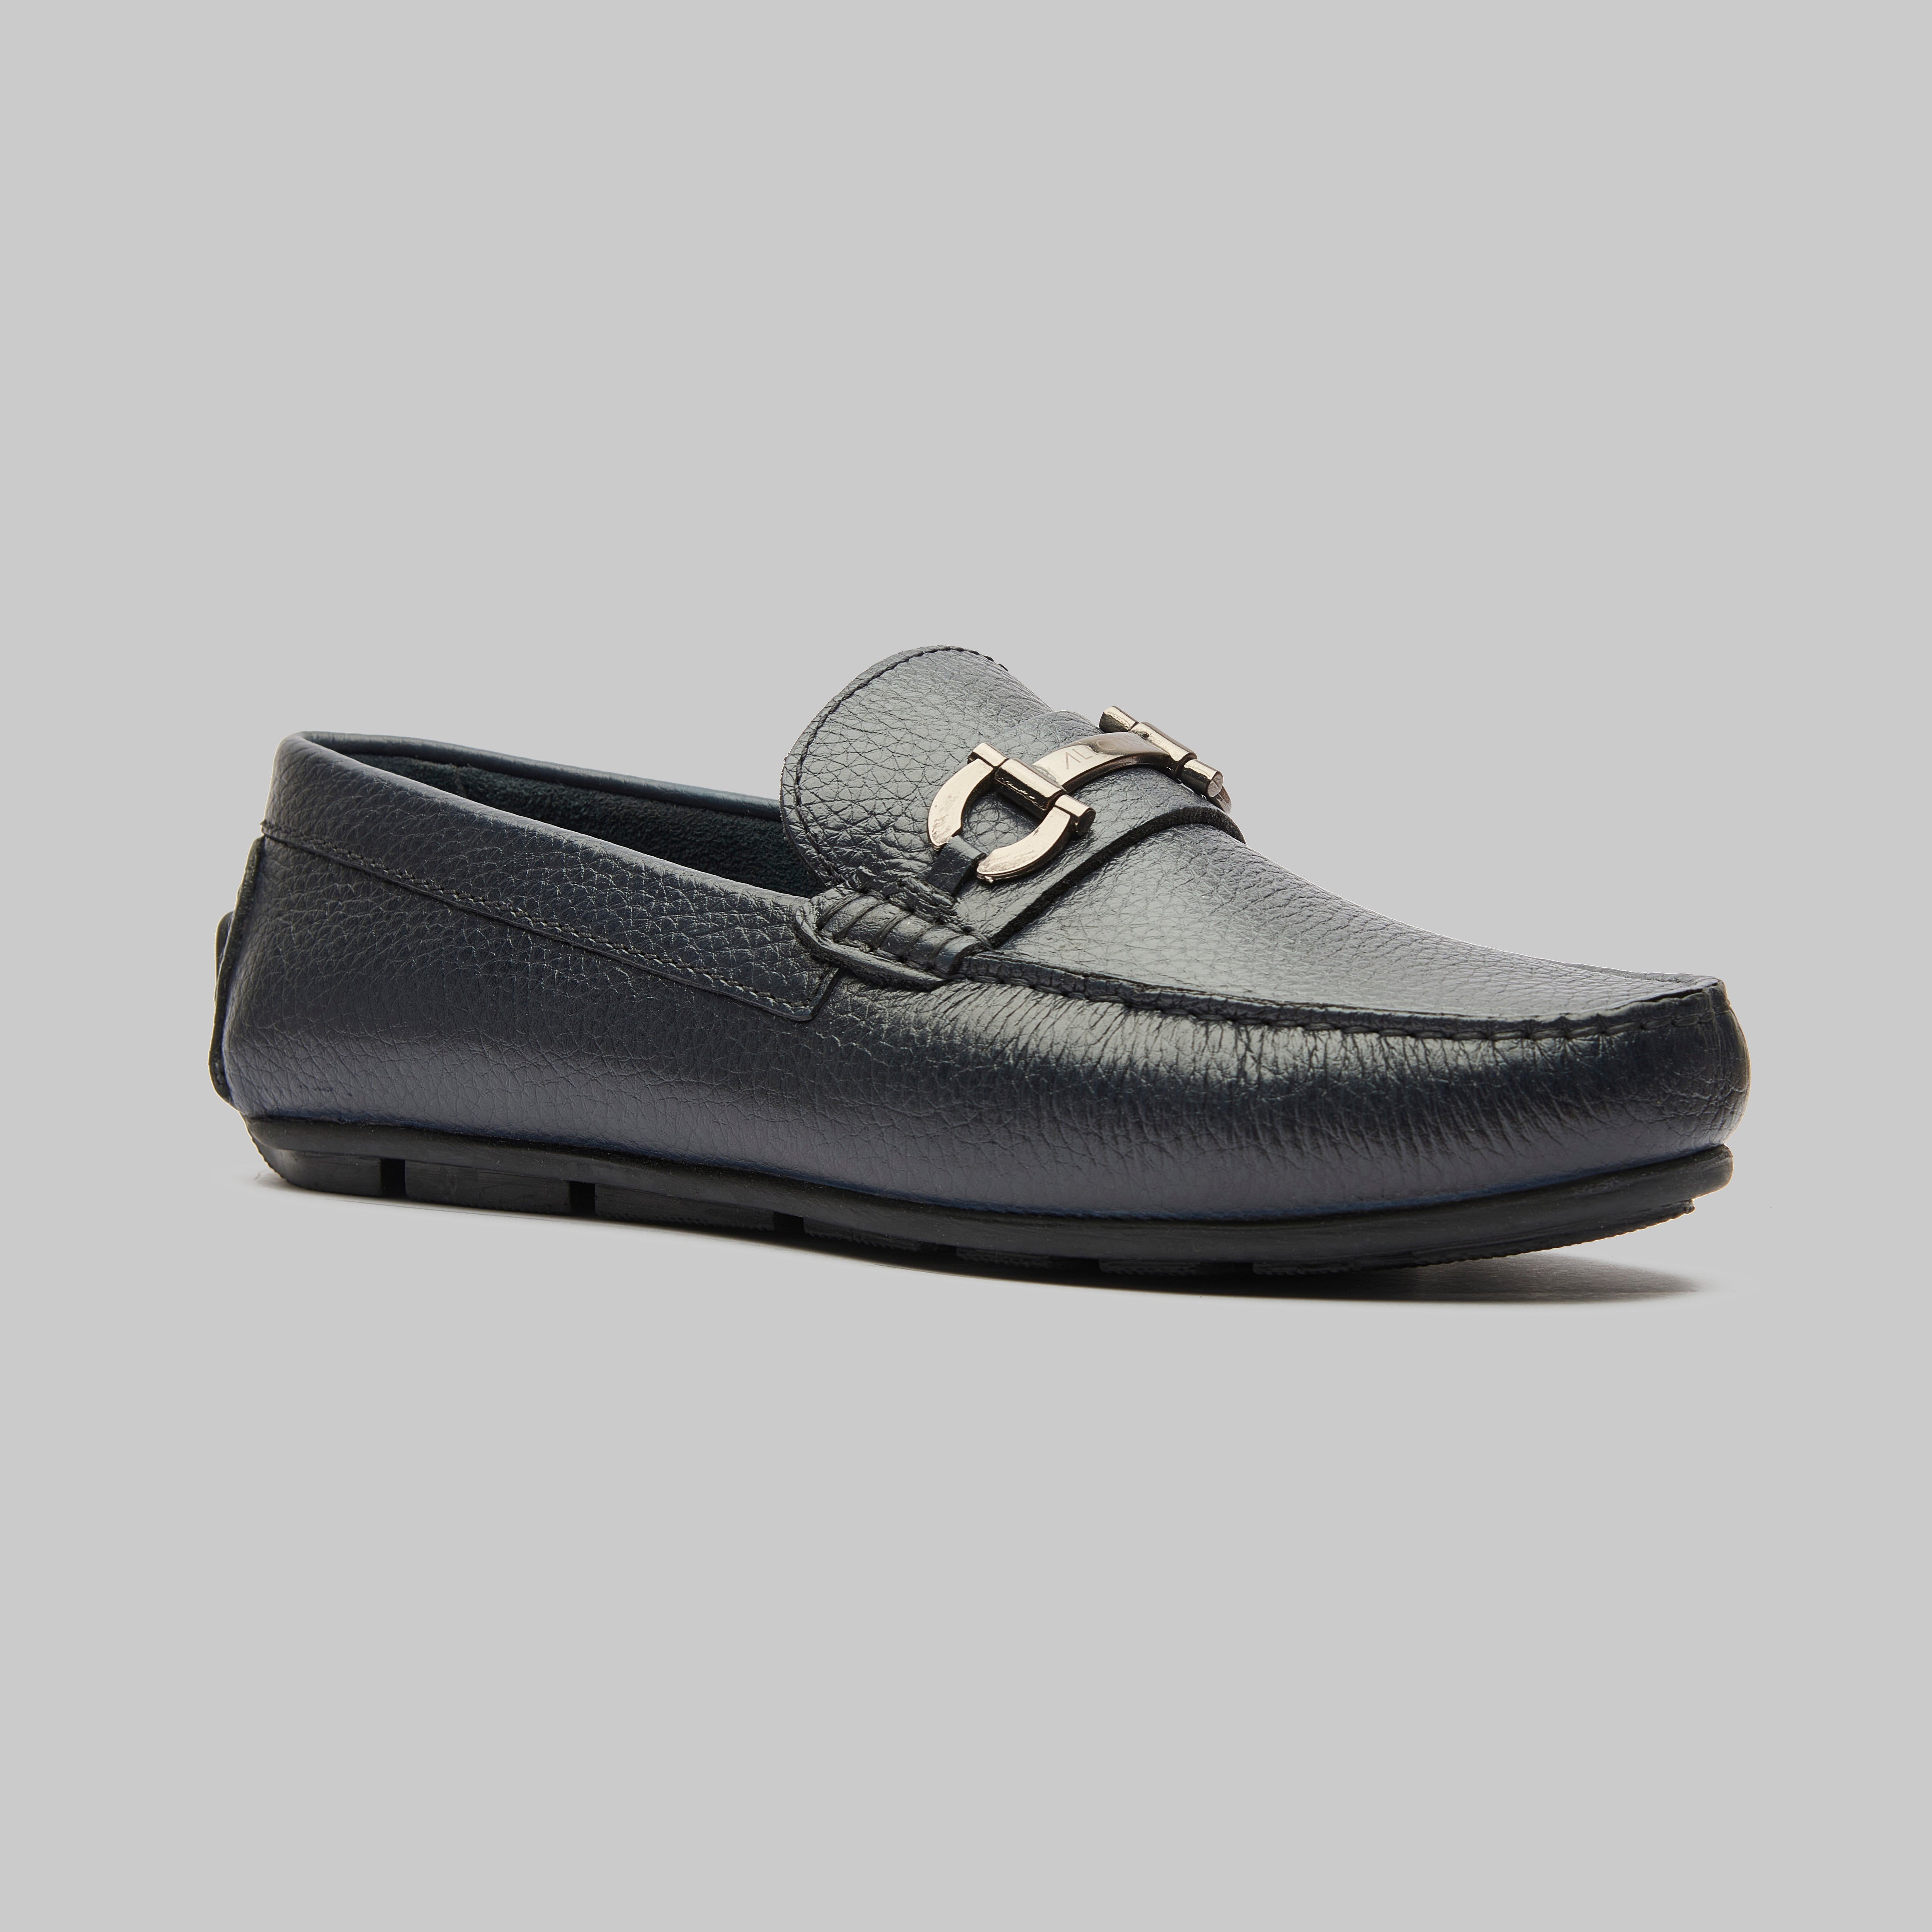 Whippy Classic Horsebit Driving Loafers